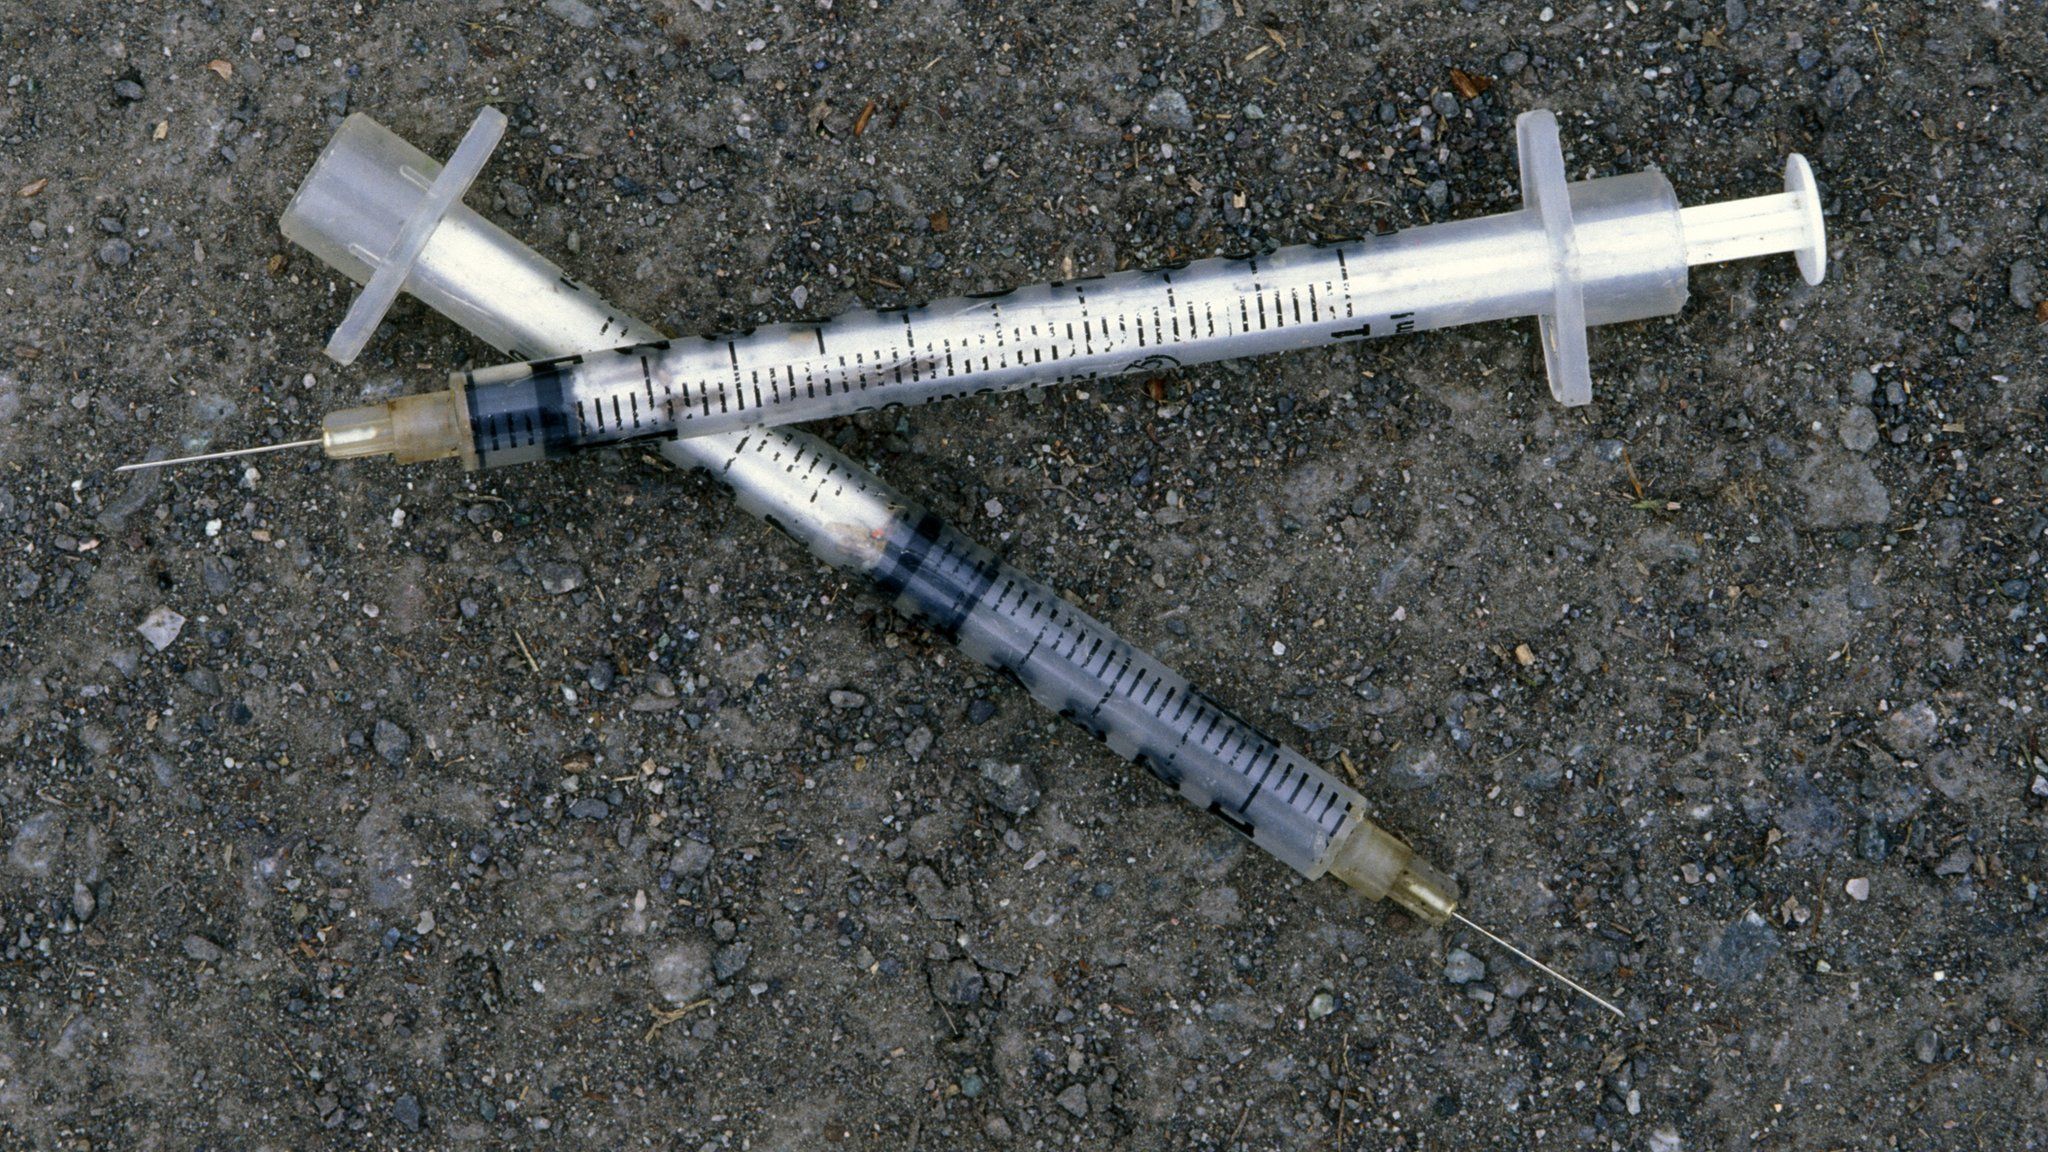 DIscarded syringes